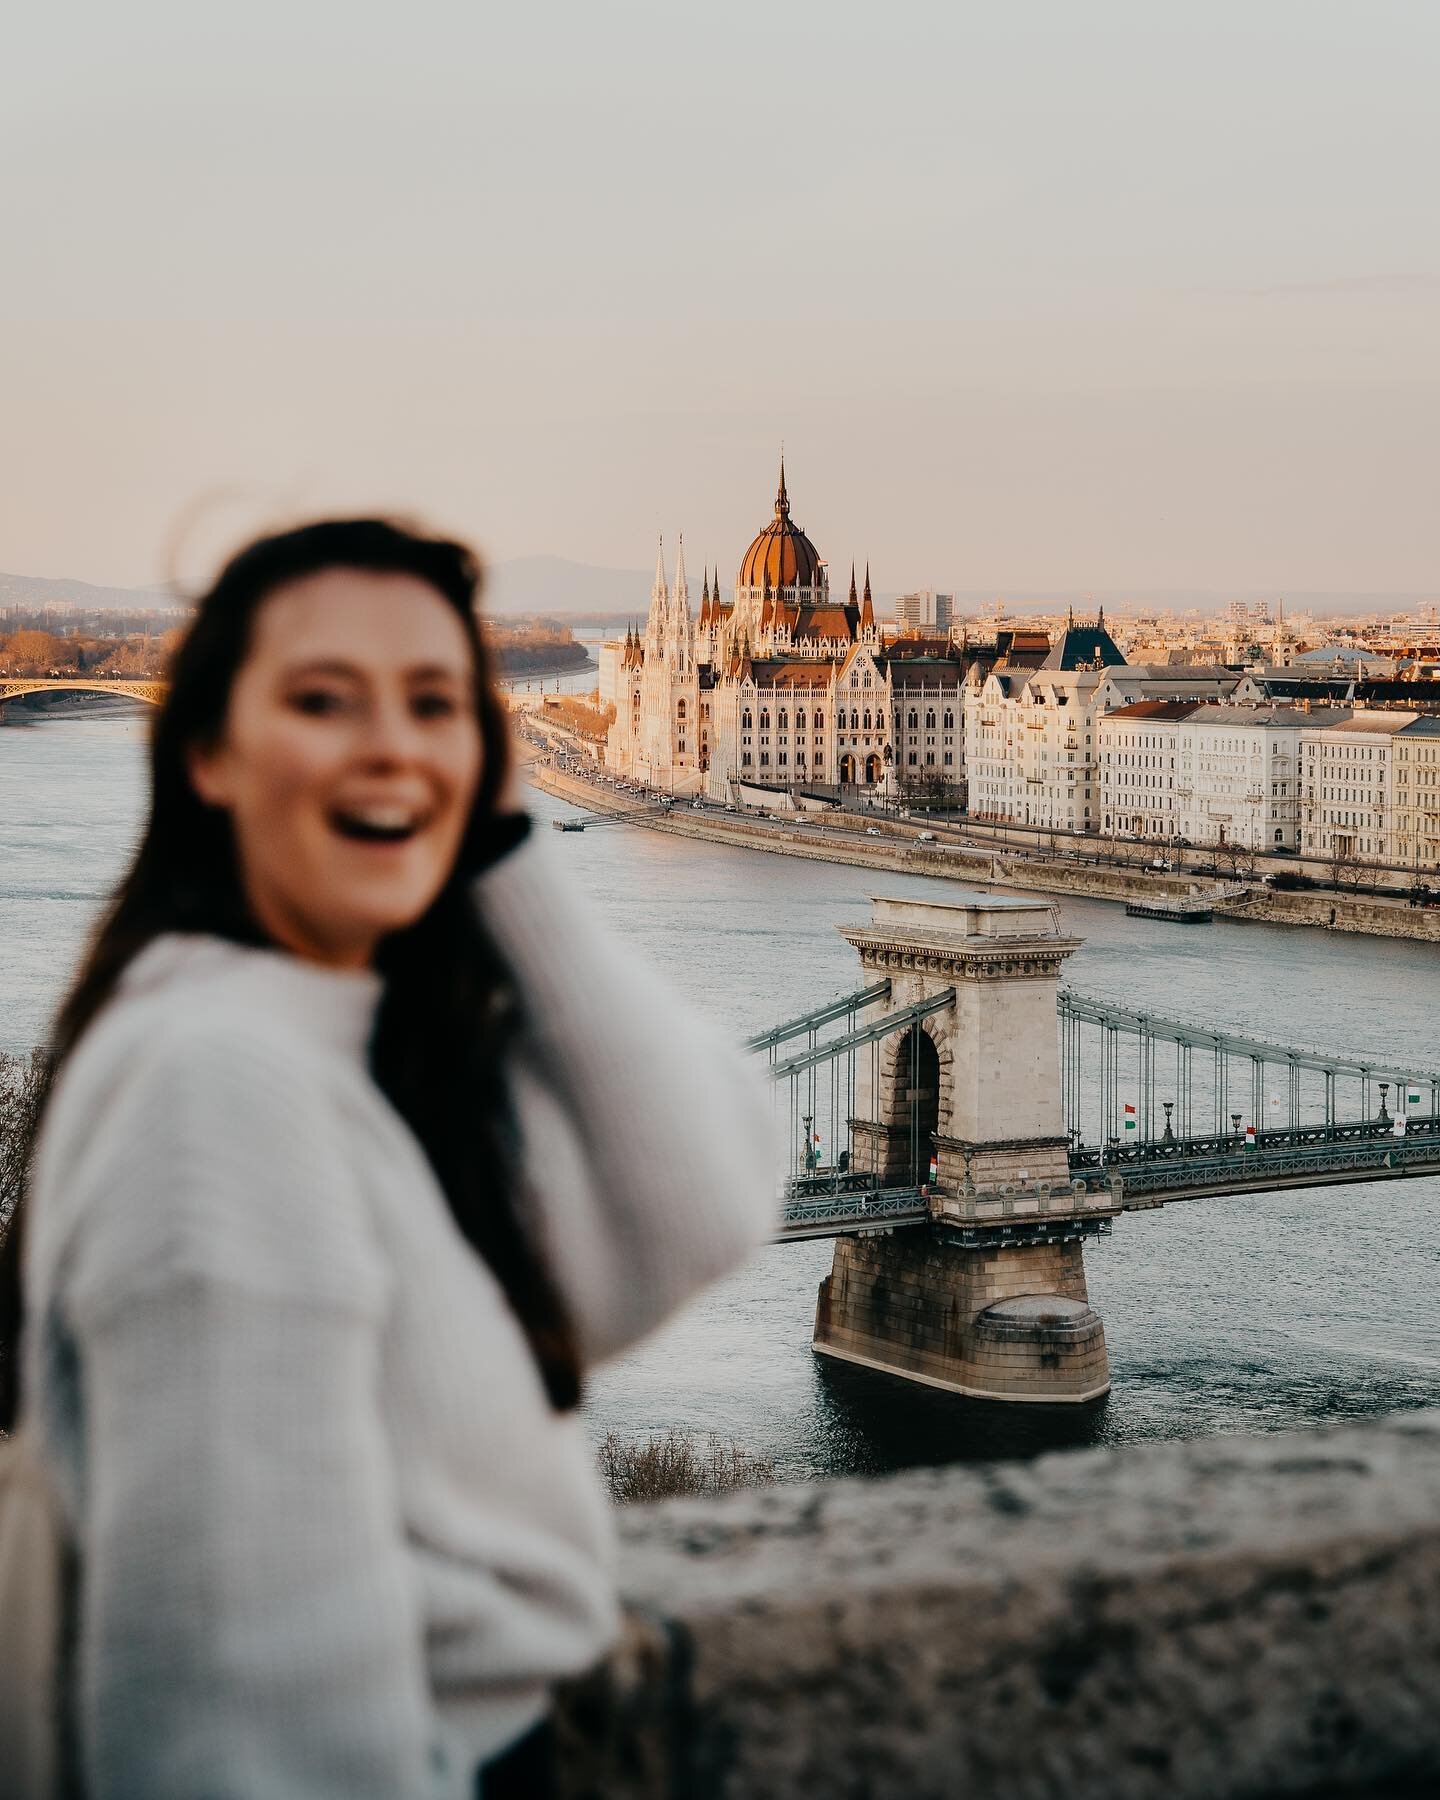 &quot;My house in Budapest, my hidden treasure chest&quot;

From now on, if anyone asks us why we moved to Budapest, pretty sure this photo of Chain Bridge and the Parliament at sunset is the only explanation we&rsquo;re ever gonna need 😍

Edited wi